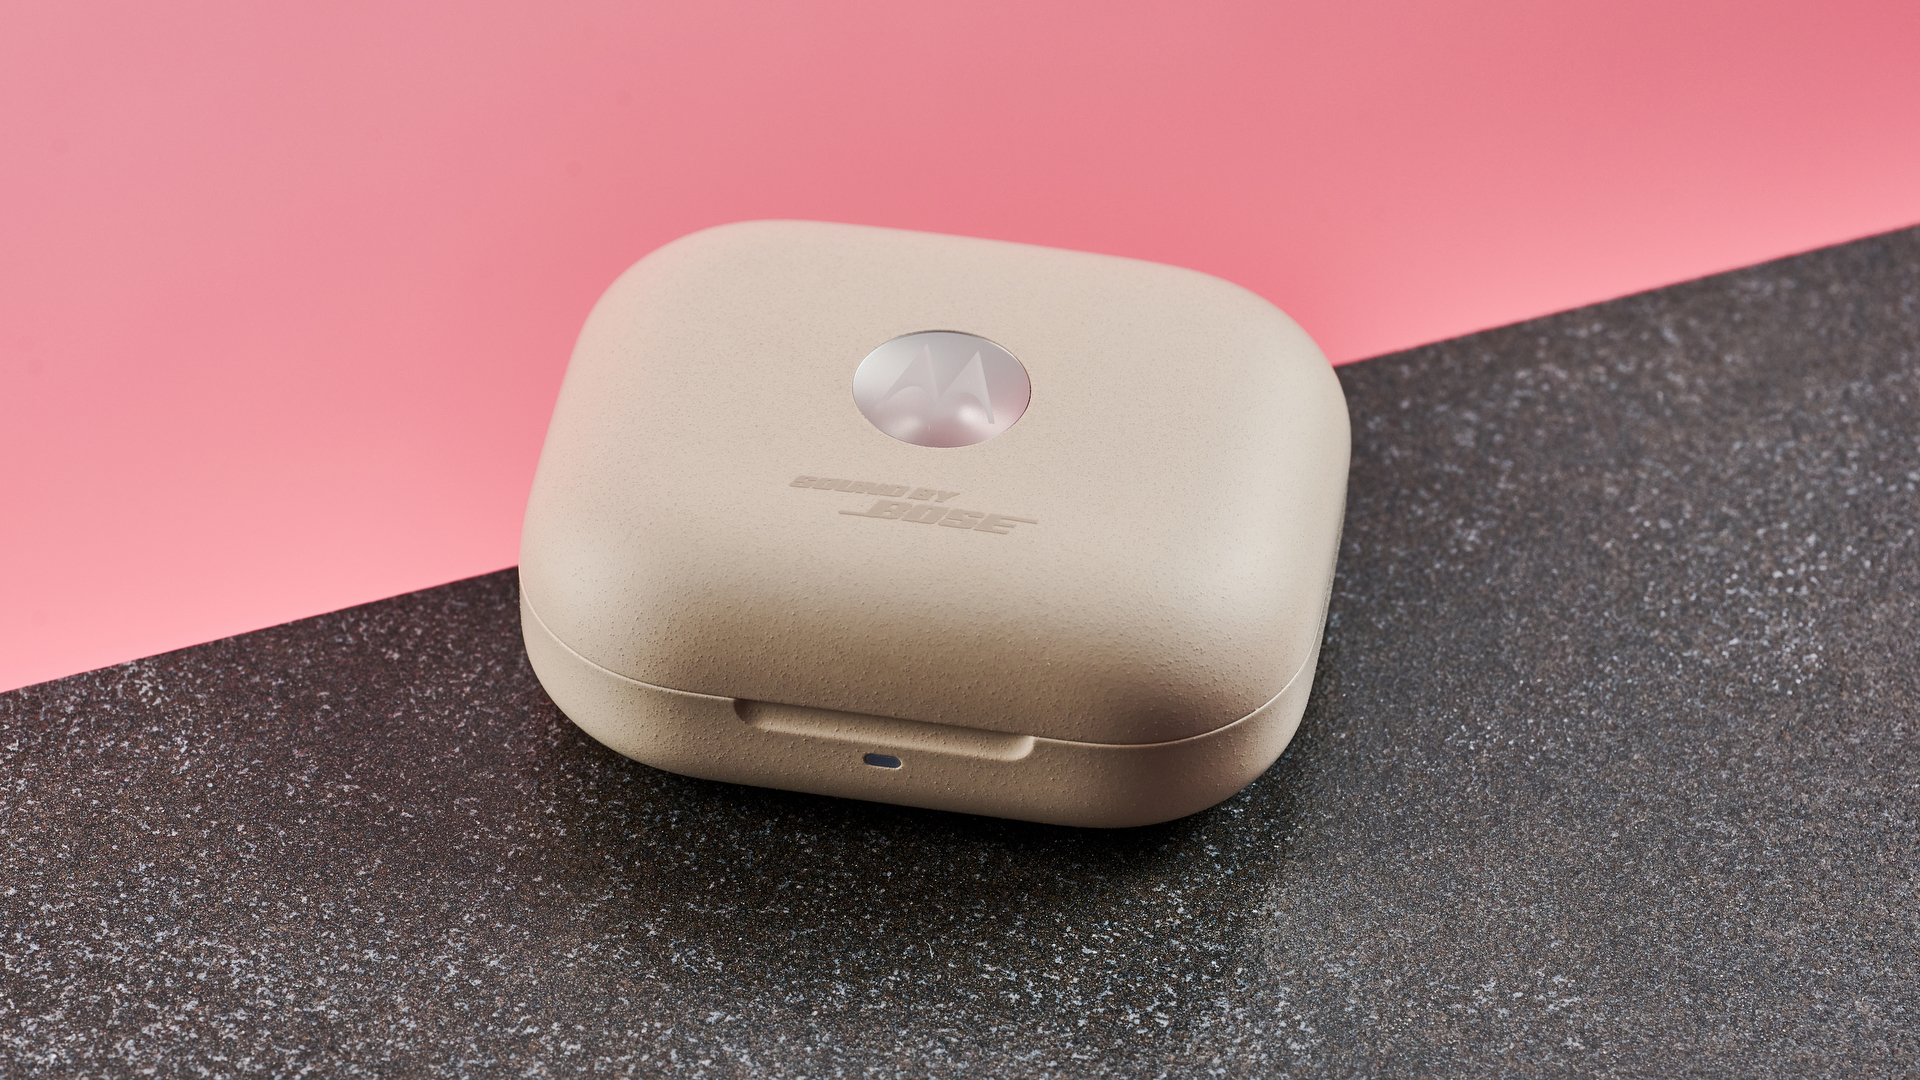 The wireless Motorola Moto Buds Plus case is closed, showing the silver Motorola logo on the top. The case is a sandy colour and has a rough texture. It is pictured on a dark surface and against a pink background.